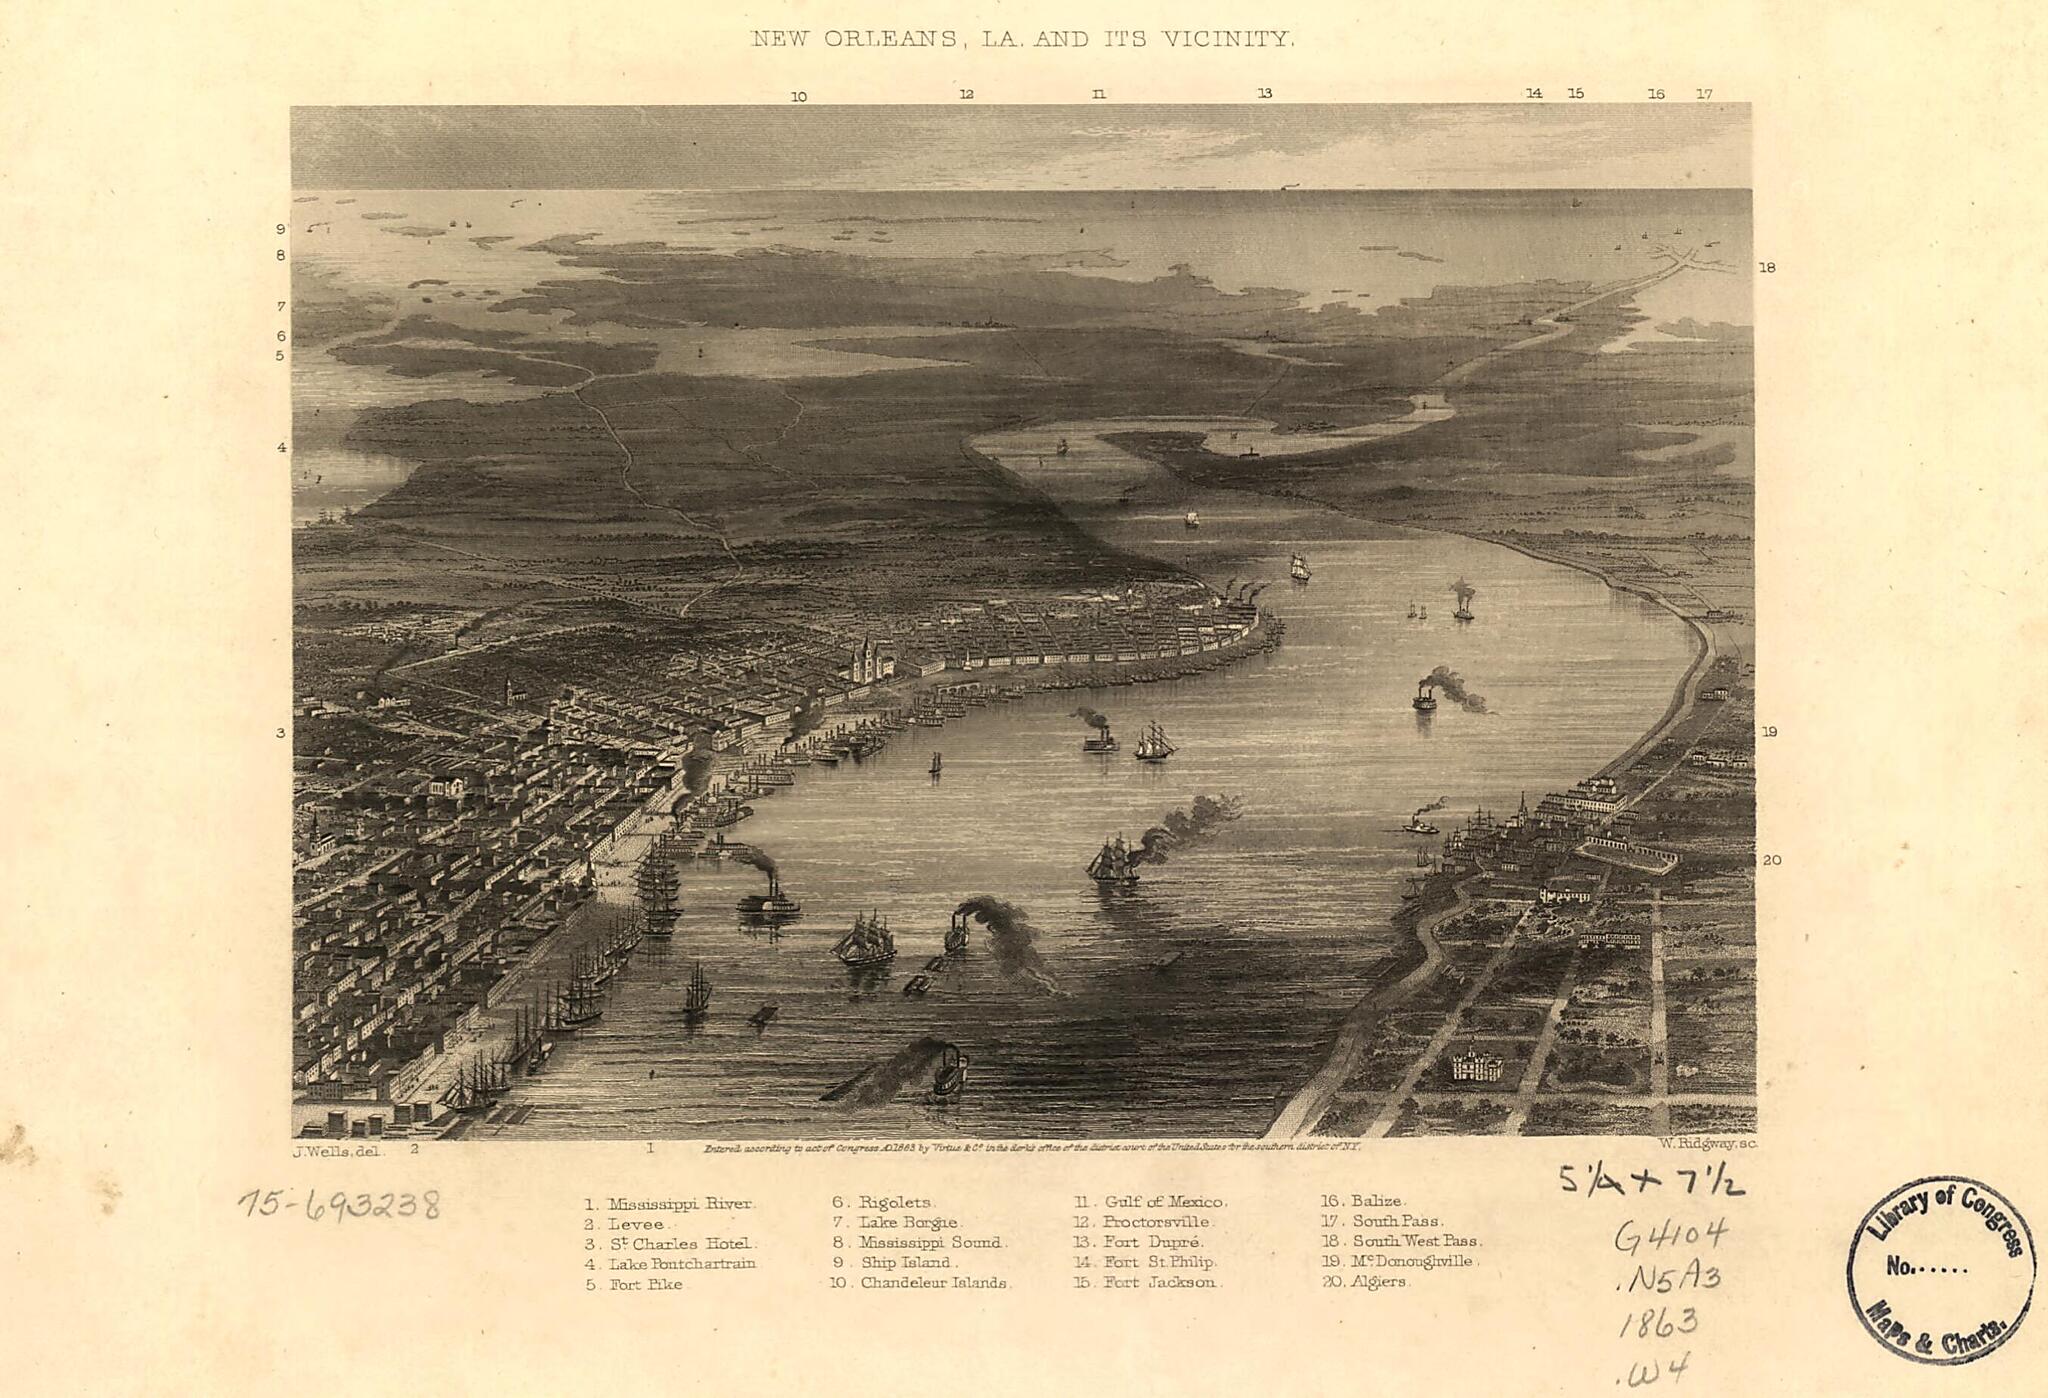 This old map of New Orleans, La. and Its Vicinity from 1863 was created by W. Ridgway,  Virtue &amp; Co, J. Wells in 1863